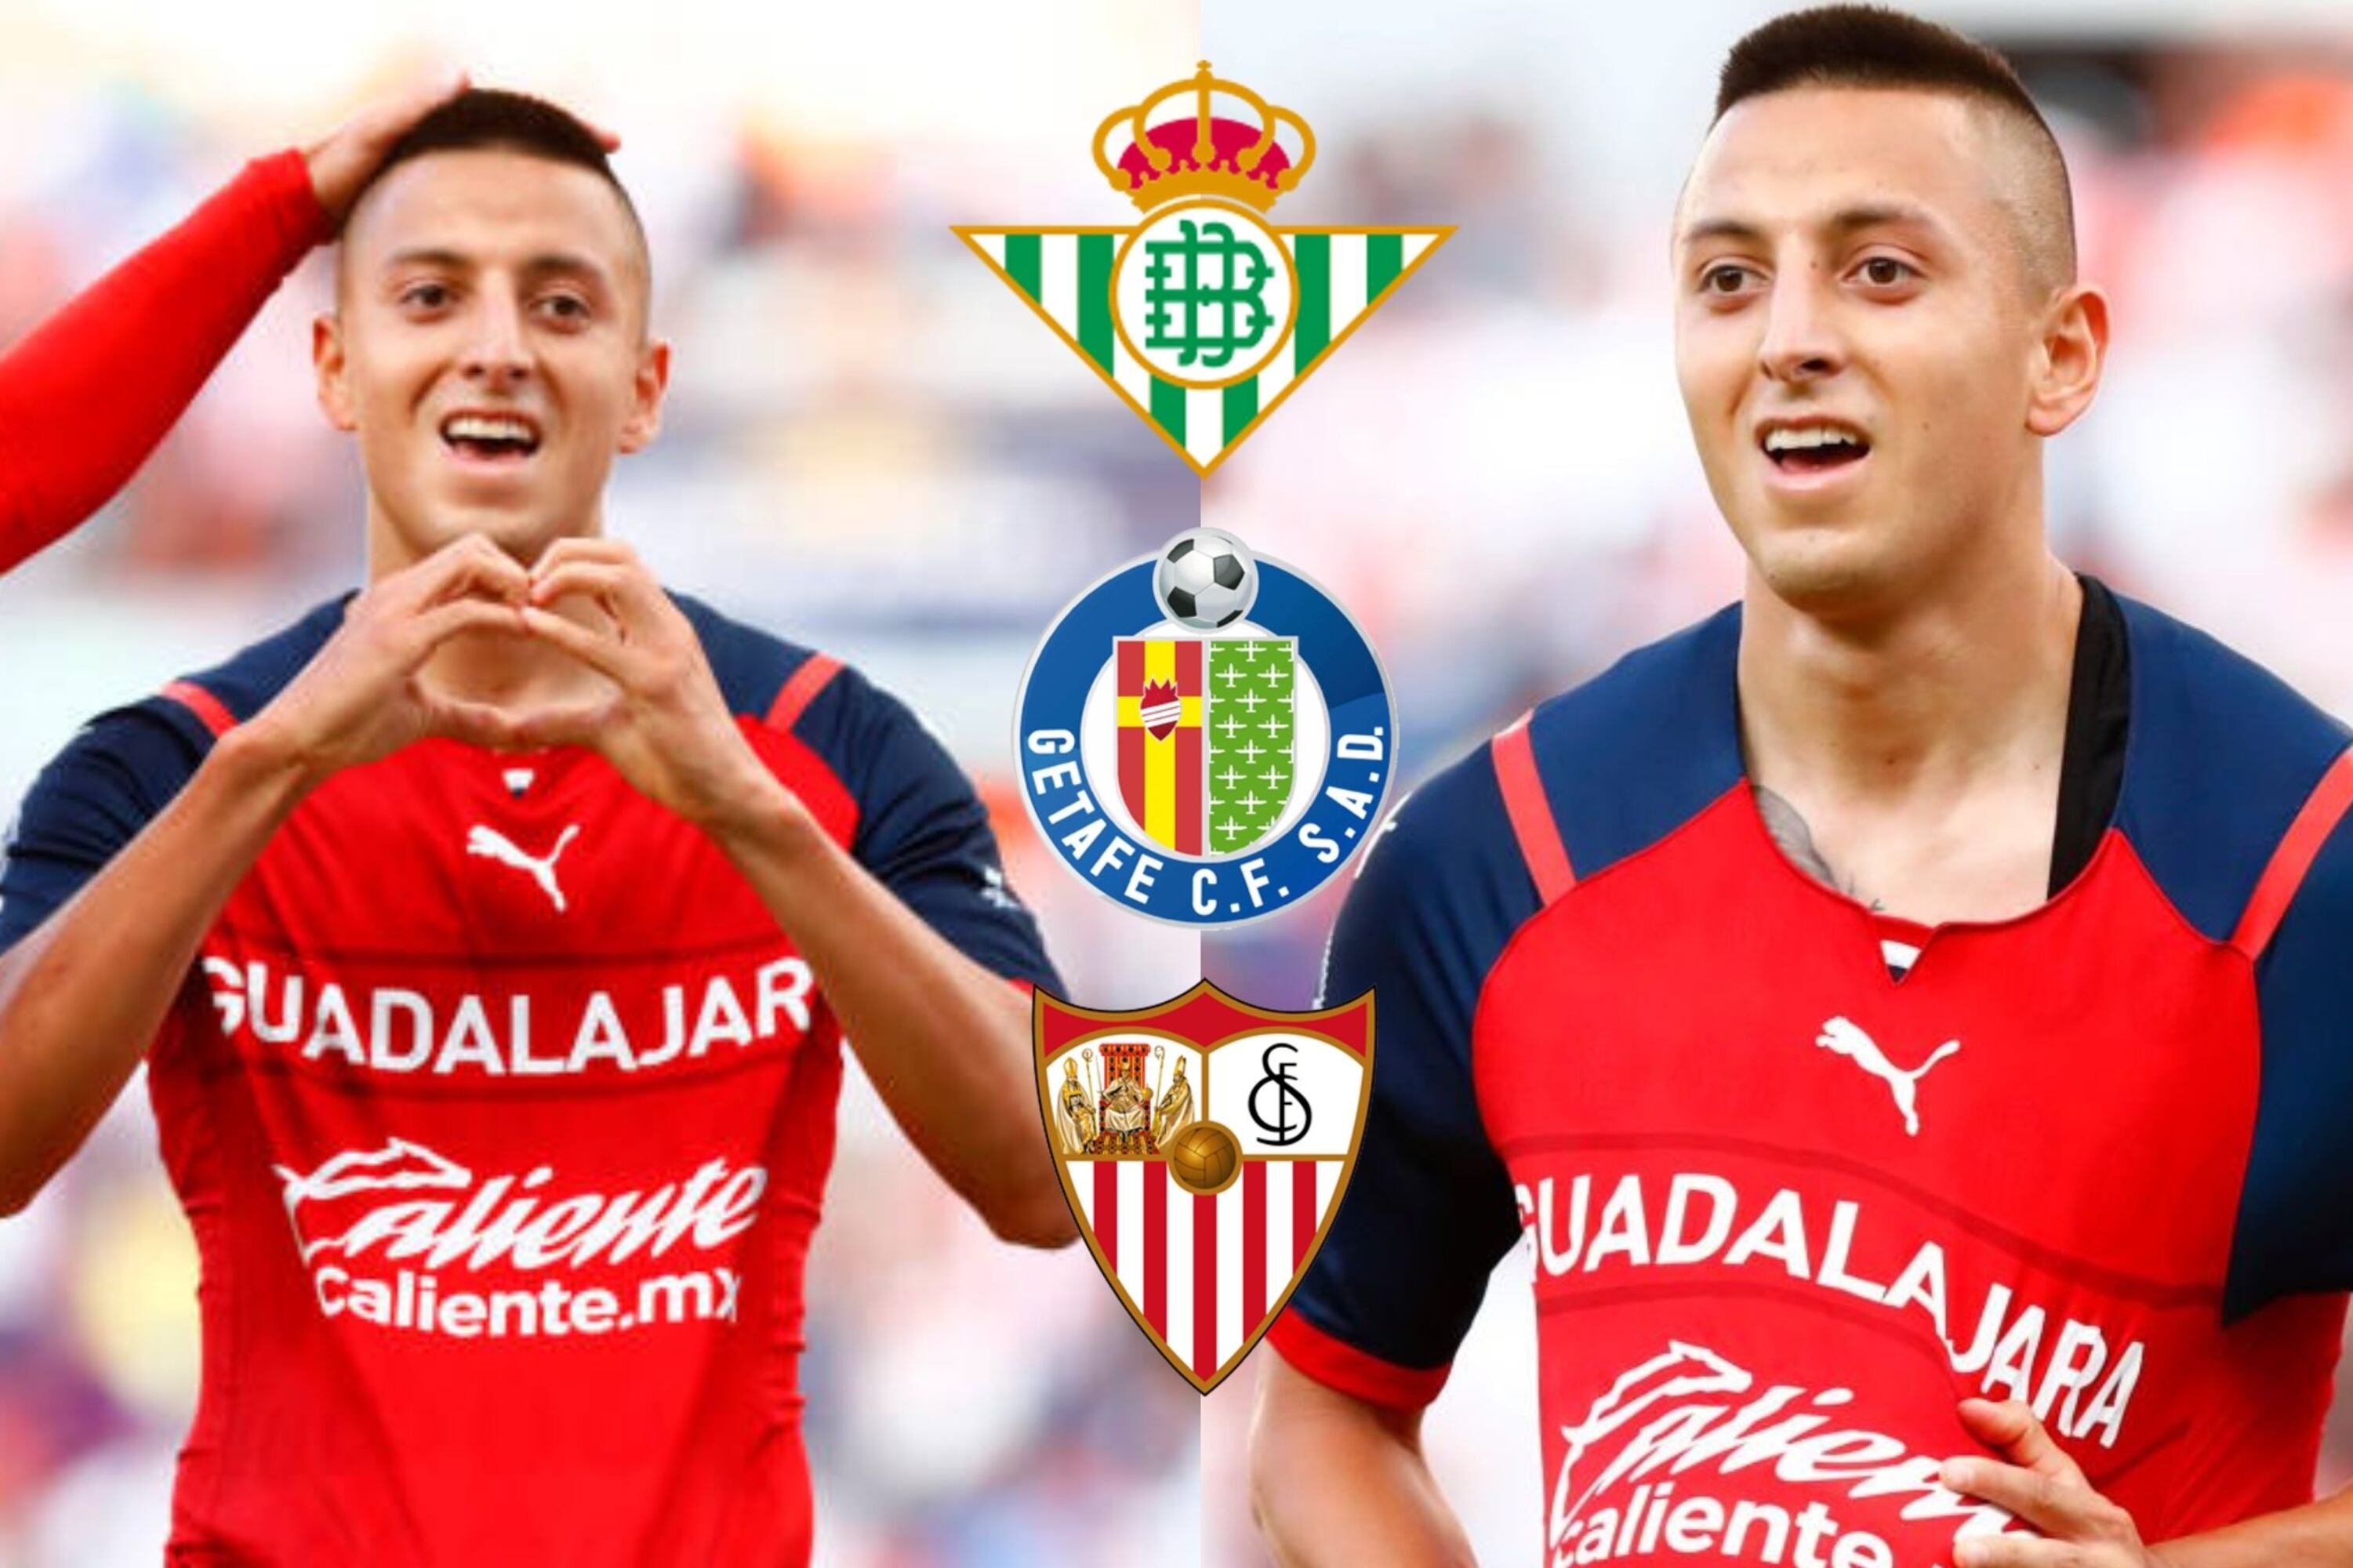 Alvarado became a star at Chivas and now he received the best news from Spain